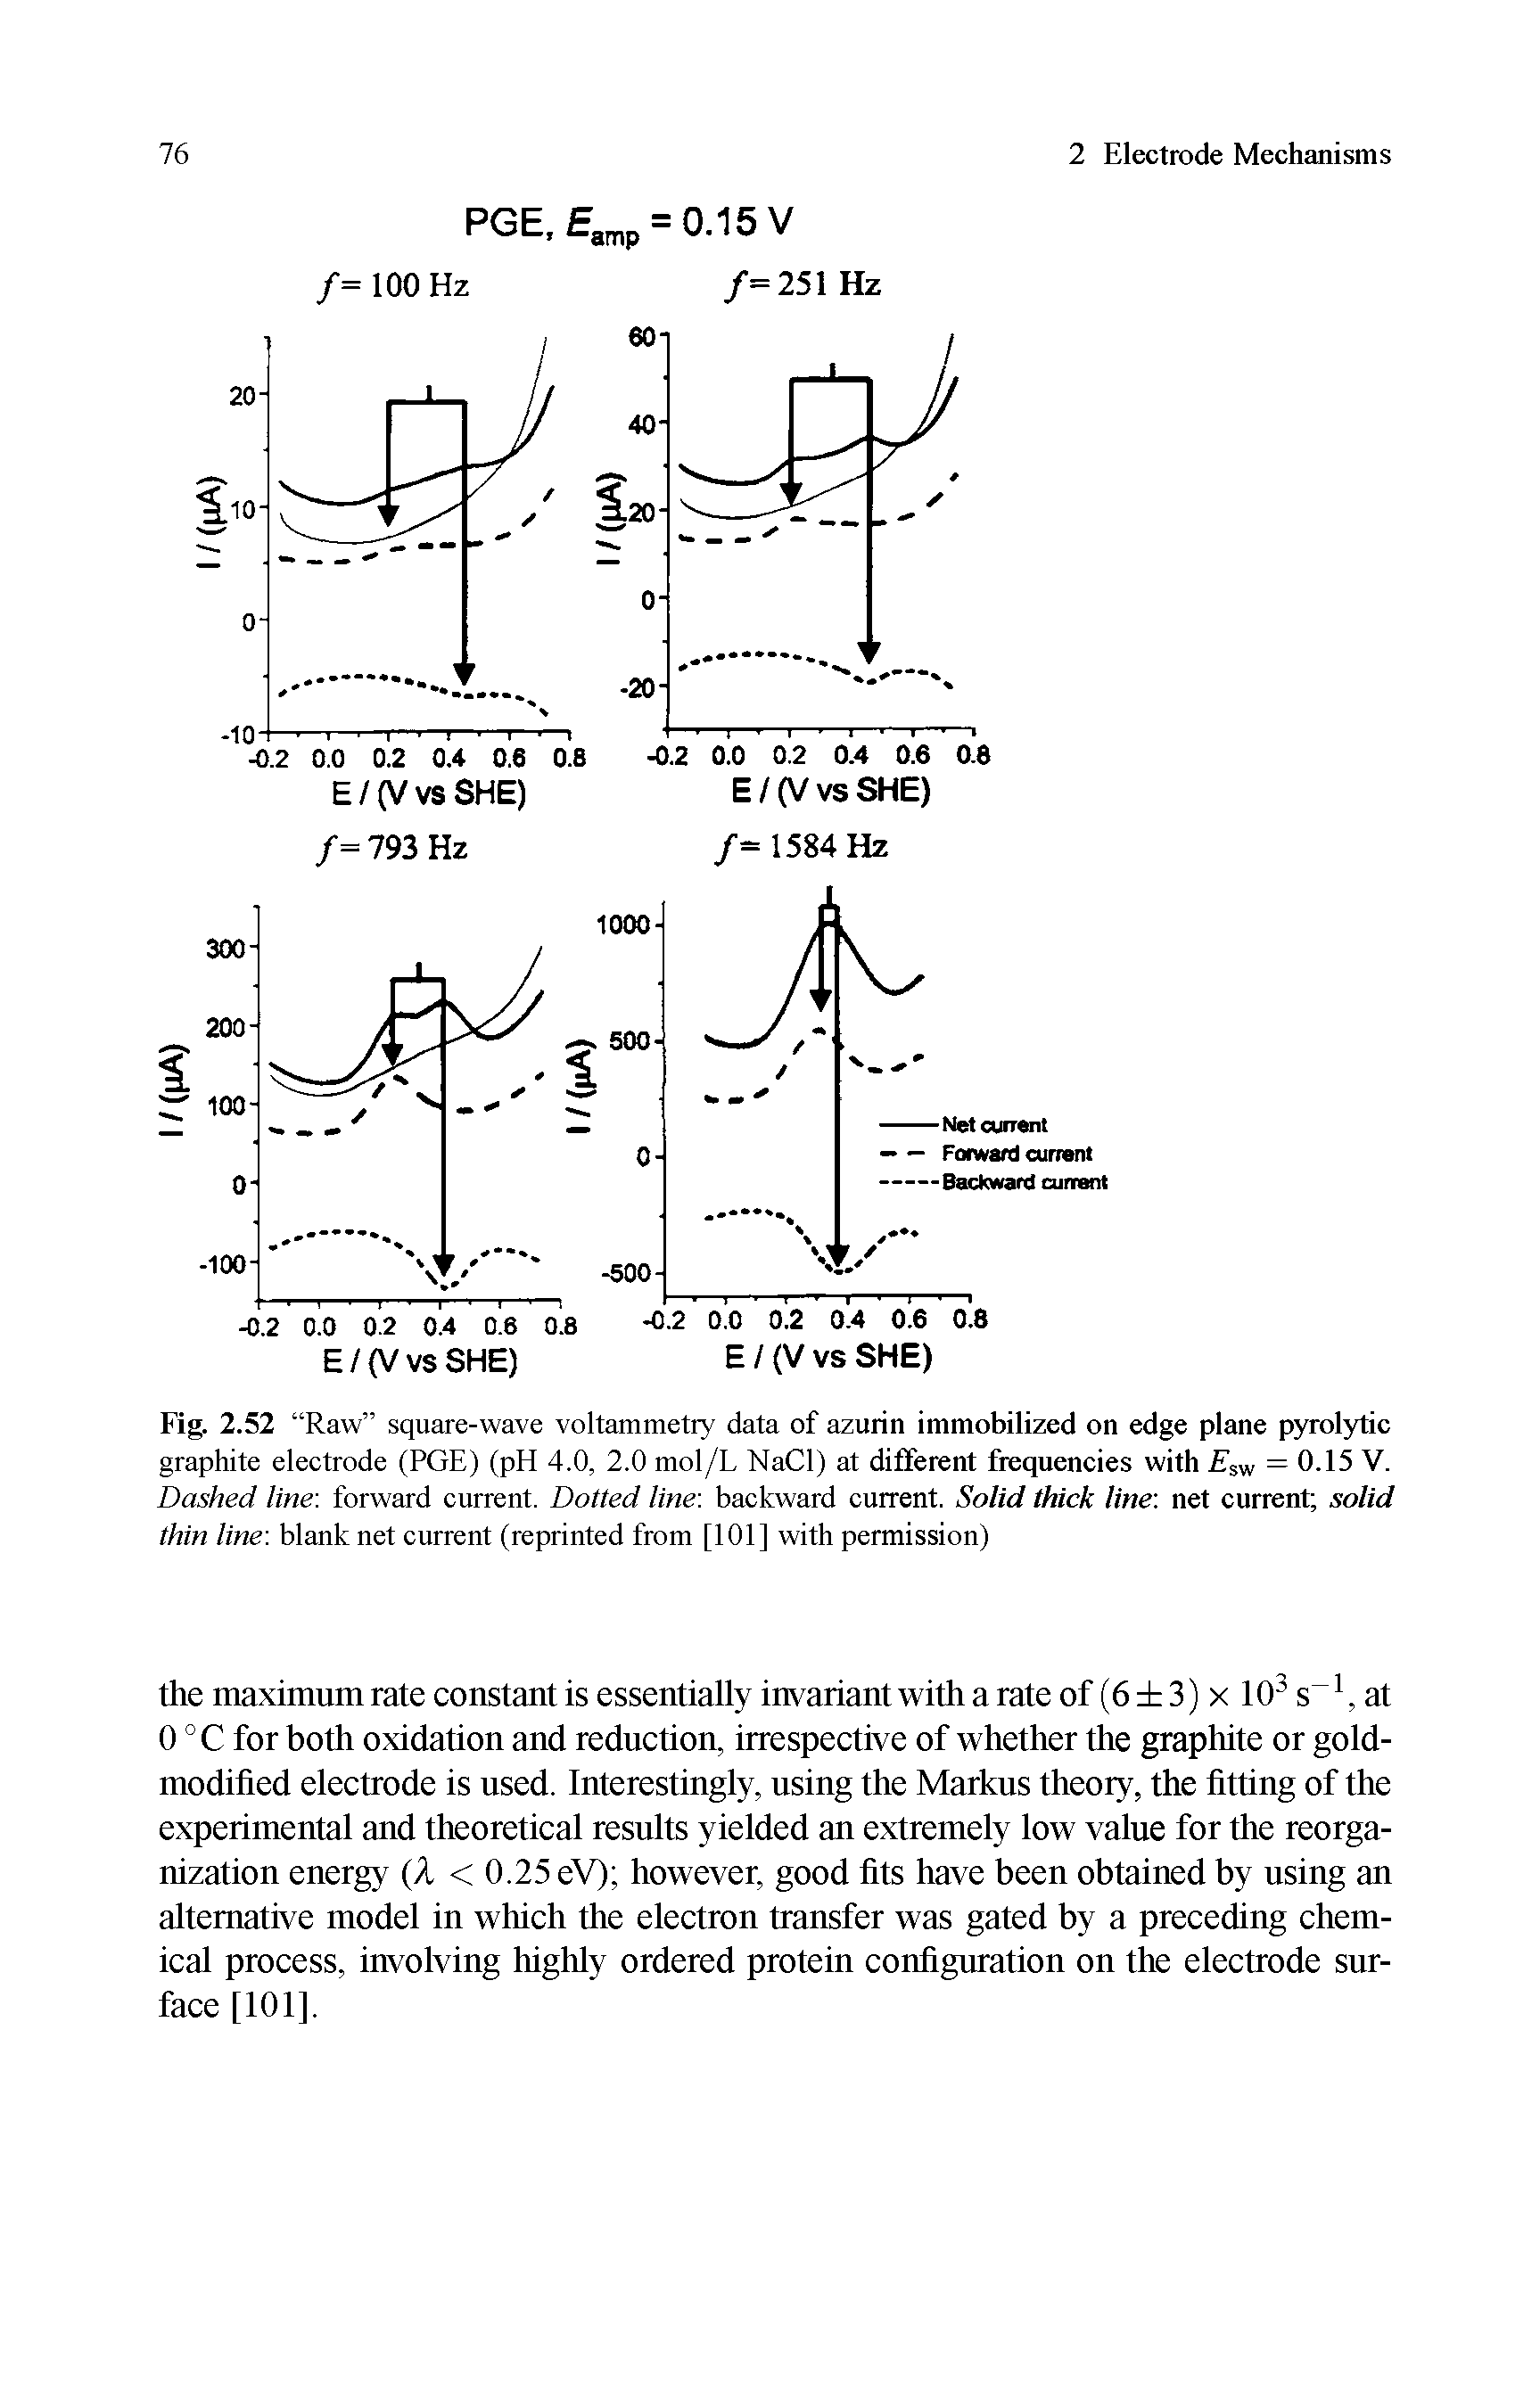 Fig. 2.52 Raw square-wave voltammetry data of azurin immobilized on edge plane pyrolytic graphite electrode (PGE) (pH 4.0, 2.0 mol/L NaCl) at different frequencies with = 0.15 V. Dashed line, forward current. Dotted line, backward current. Solid thick line, net current solid thin line, blank net current (reprinted from [101] with permission)...